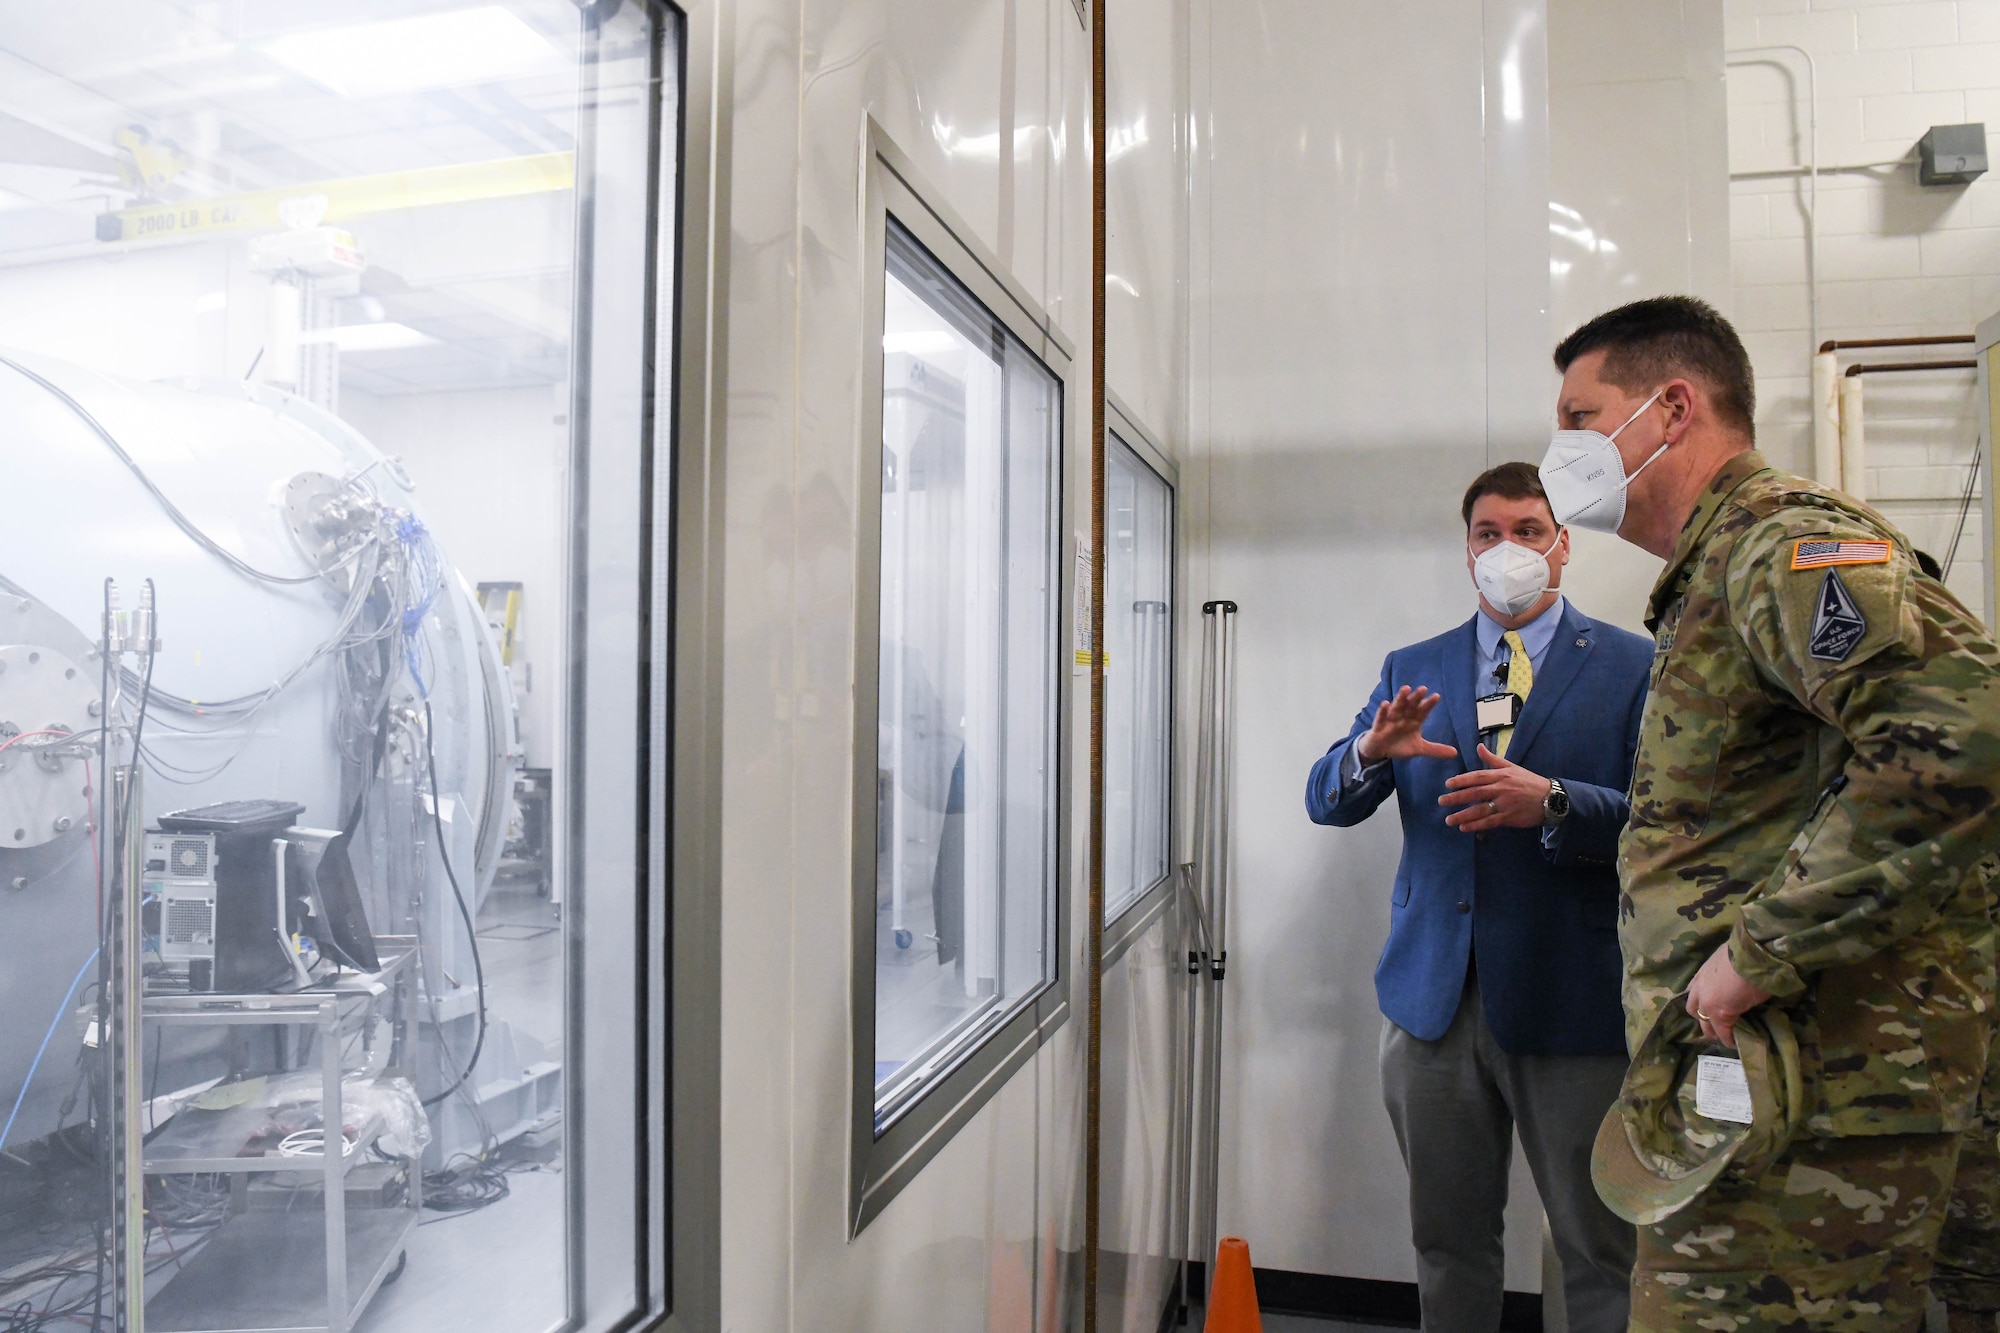 Gen. David Thompson, right, vice chief of space operations, U.S. Space Force, looks at the 7V Space Environmental Chamber as John Claybrook, capability manager for the Arnold Engineering Development Complex Space Asset Resilience Ground Test and Evaluation, briefs him about the capability at Arnold Air Force Base, Tenn., headquarters of AEDC, Feb. 5, 2021.  (U.S. Air Force photo by Jill Pickett) (This image was altered by obscuring badges for security purposes.)